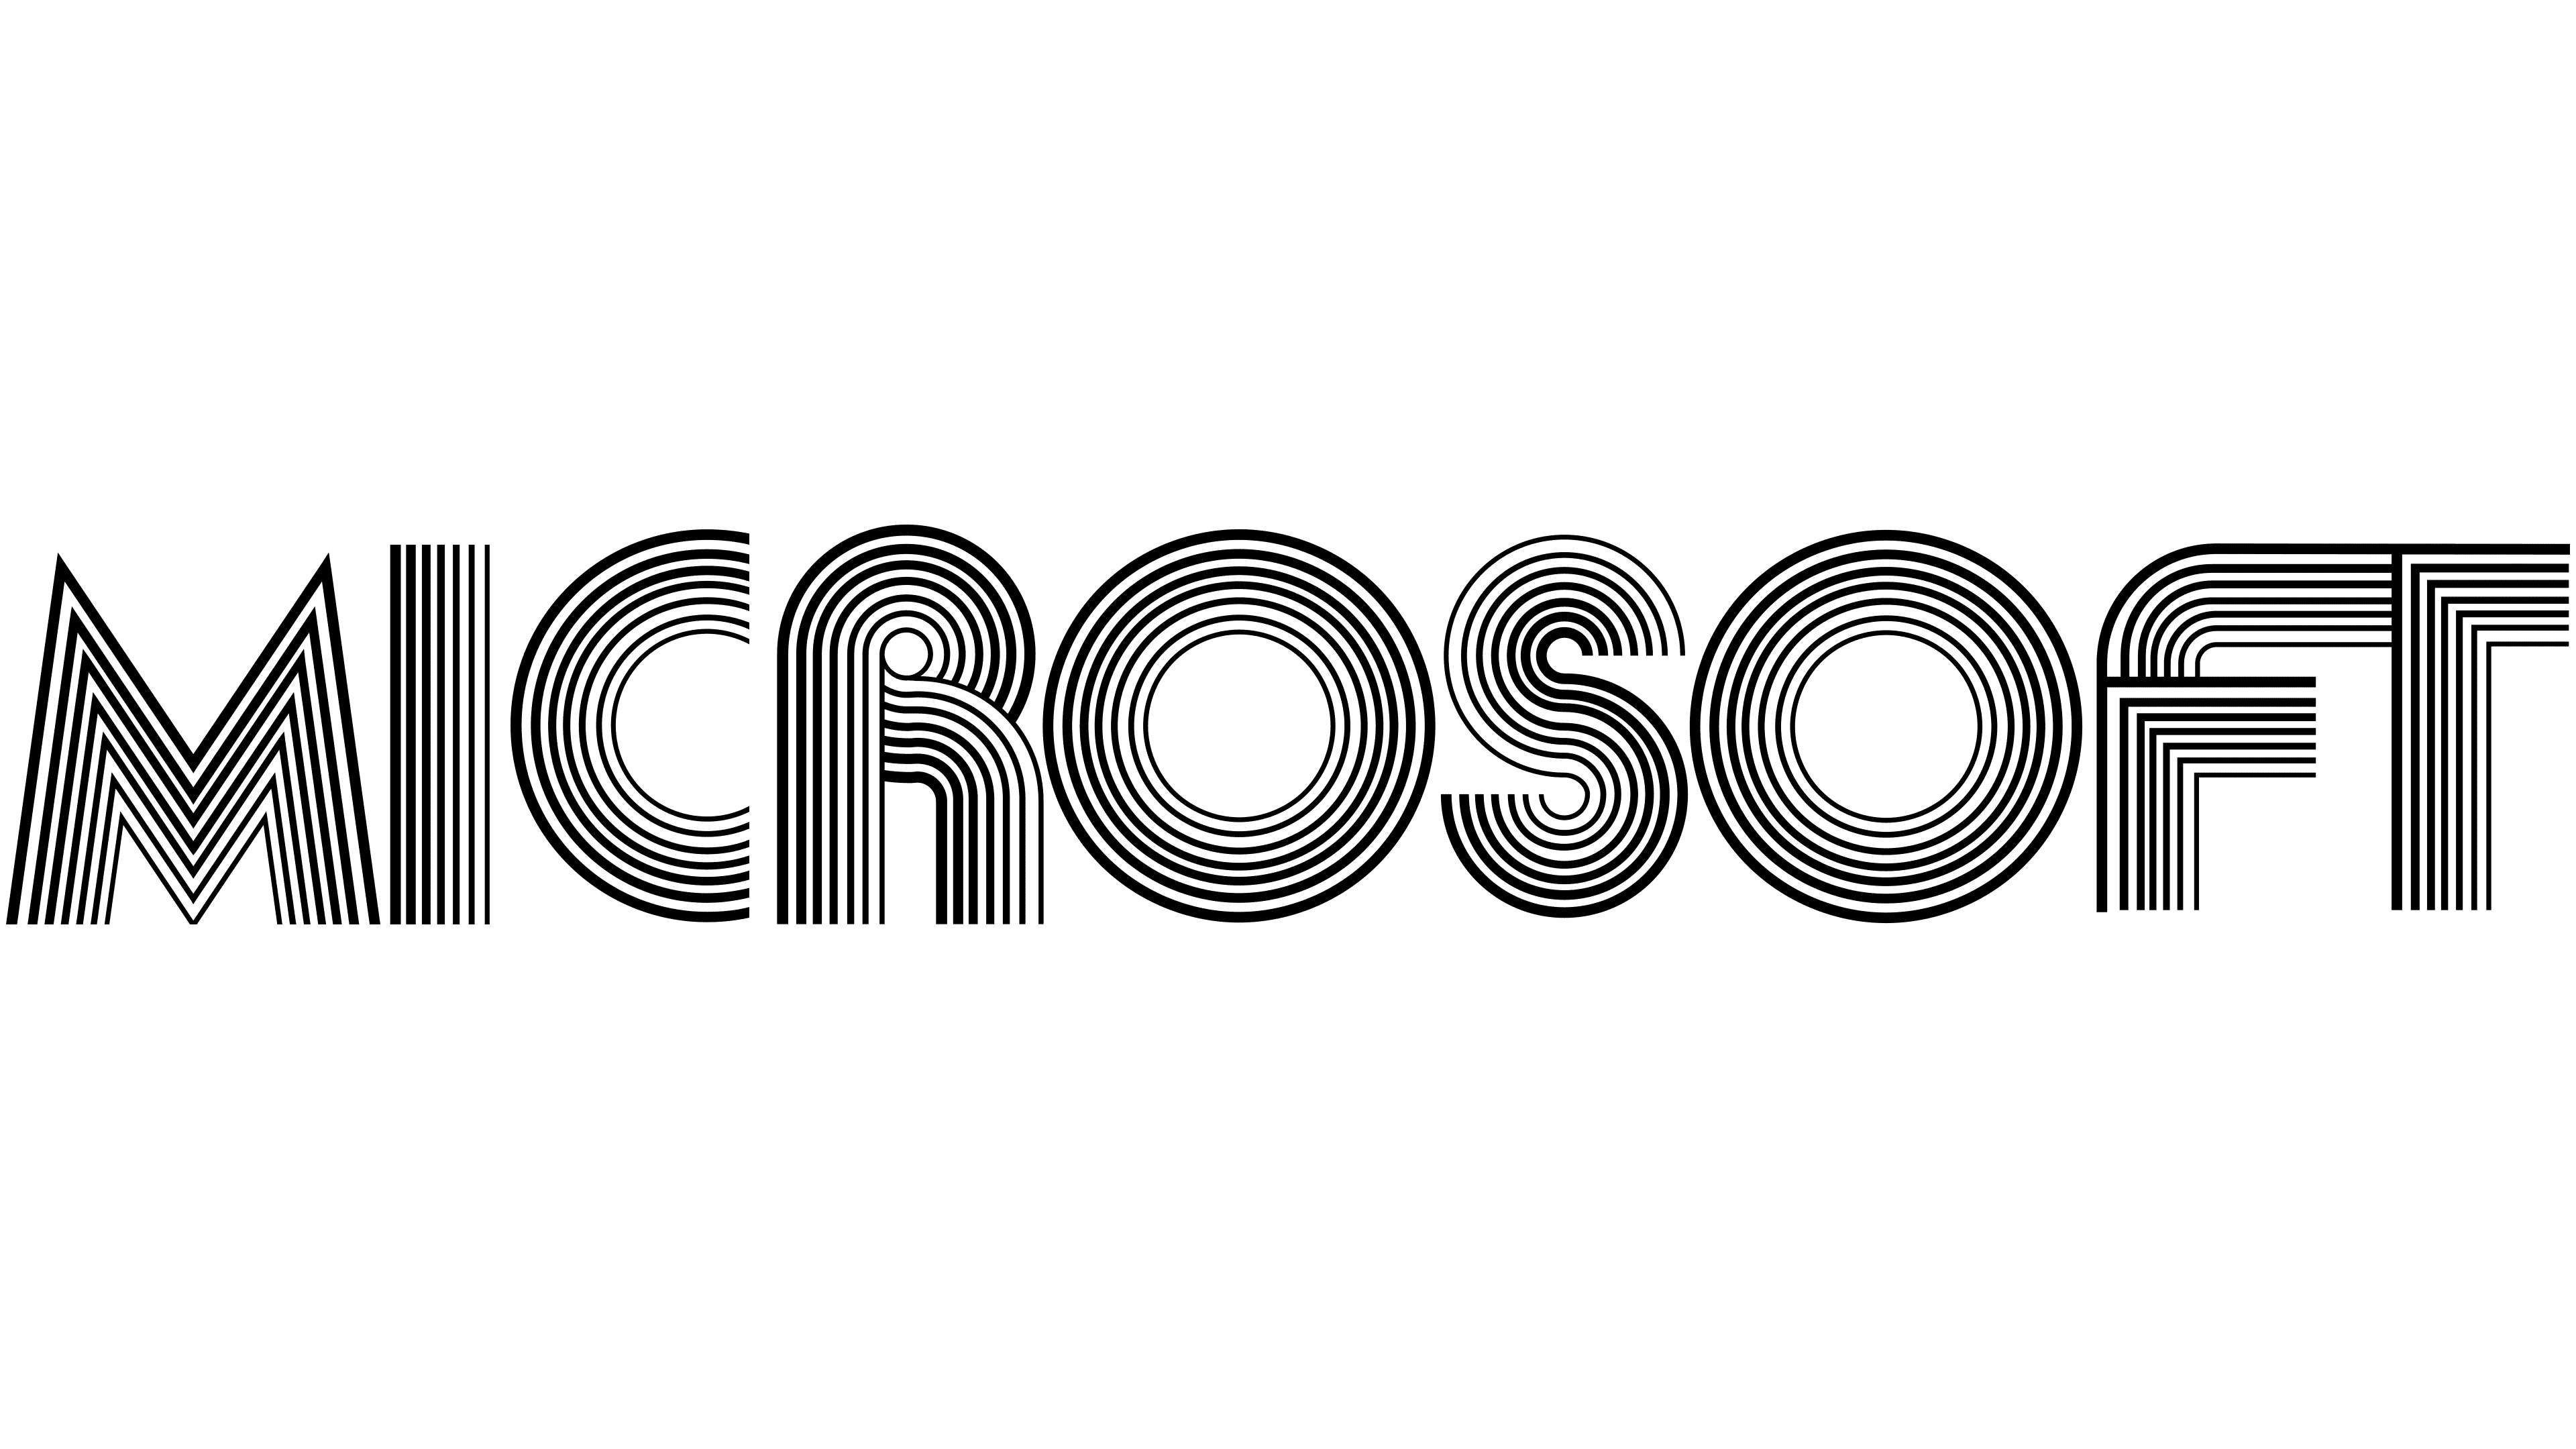 Microsoft: Minimalistic logo, Released its first product which is called the Altair BASIC in 1975. 3840x2160 4K Background.